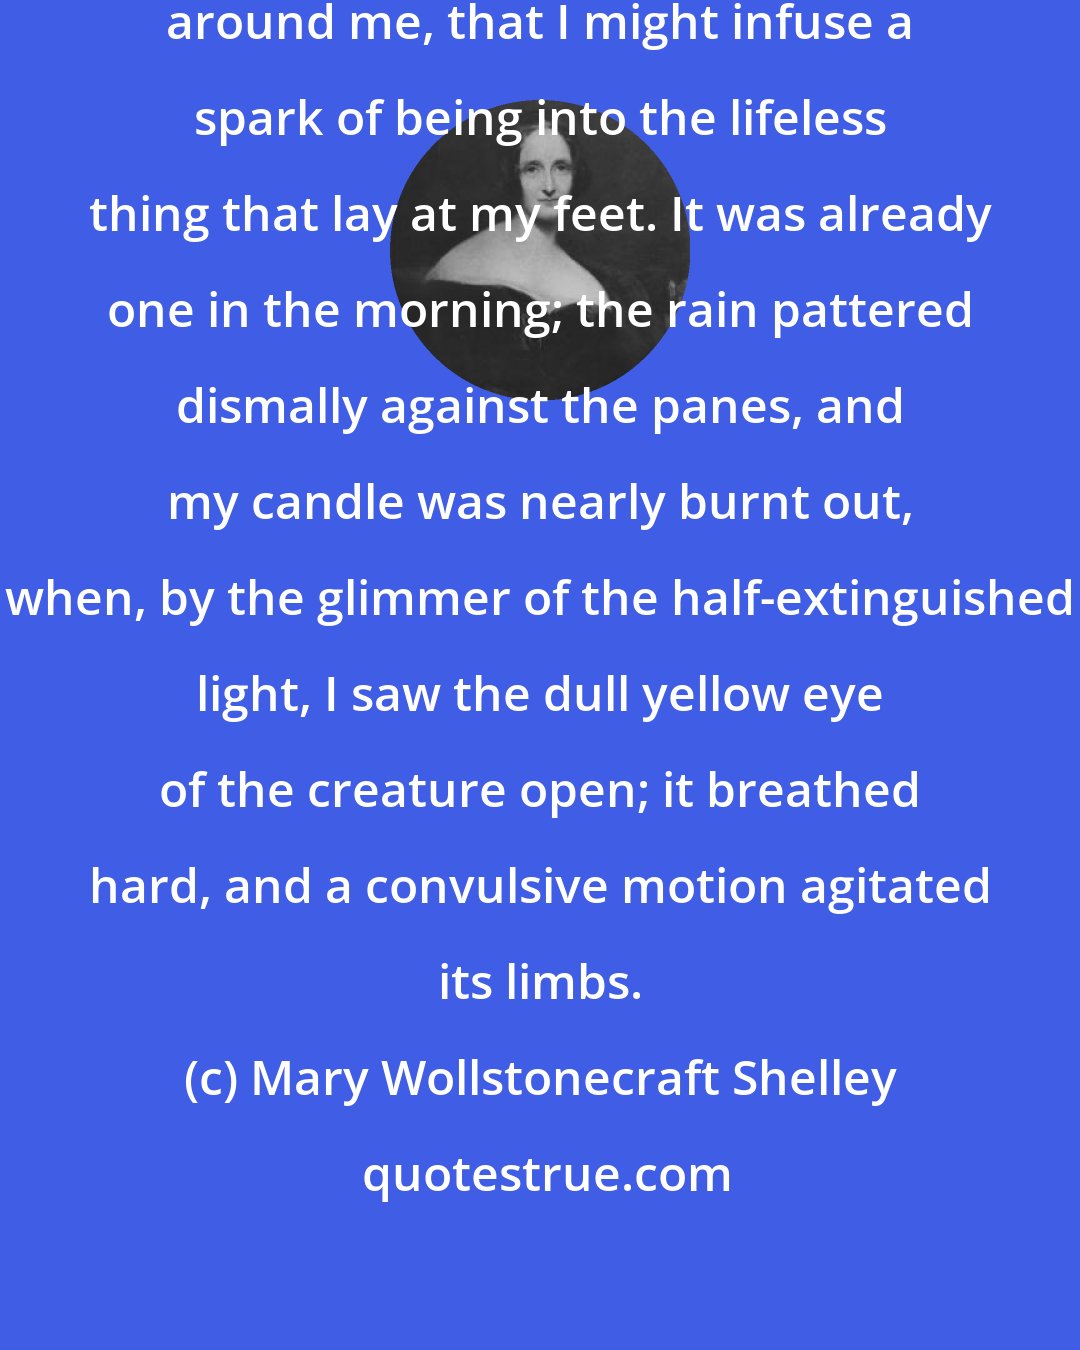 Mary Wollstonecraft Shelley: I collected the instruments of life around me, that I might infuse a spark of being into the lifeless thing that lay at my feet. It was already one in the morning; the rain pattered dismally against the panes, and my candle was nearly burnt out, when, by the glimmer of the half-extinguished light, I saw the dull yellow eye of the creature open; it breathed hard, and a convulsive motion agitated its limbs.